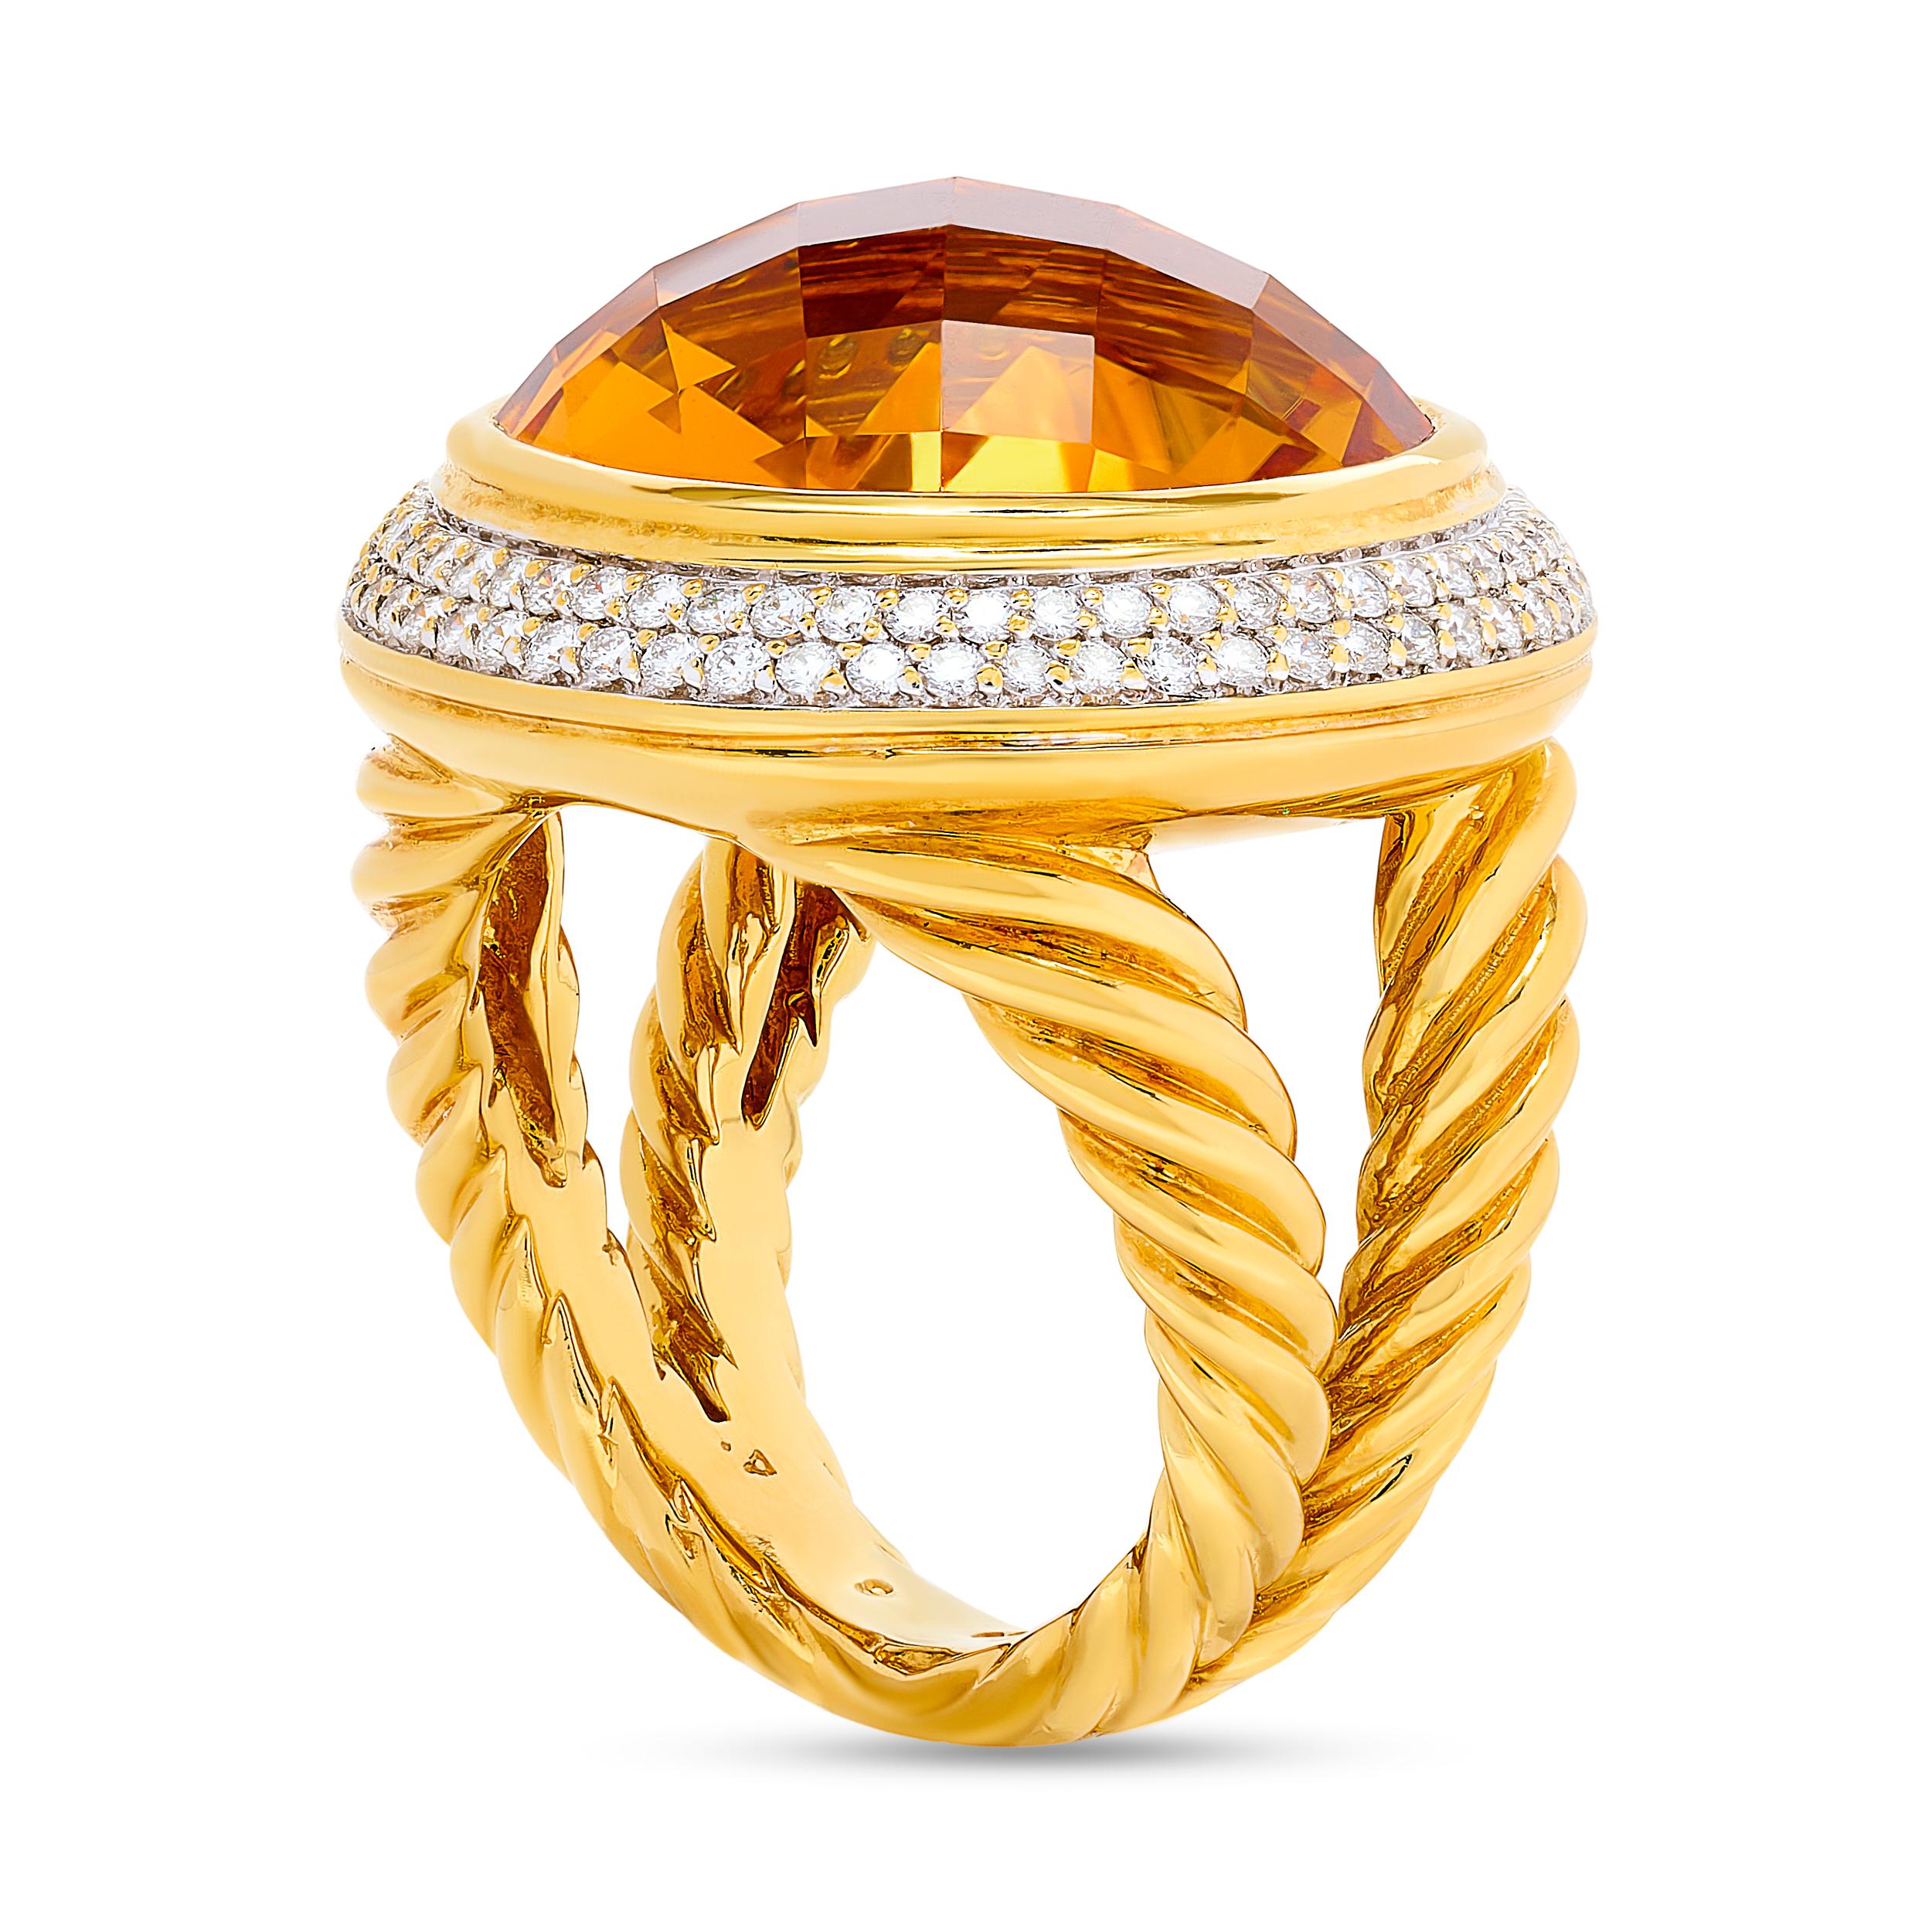 The David Yurman large citrine and diamond halo ring elegantly combines the warm glow of citrine with the brilliance of diamonds, creating a stunning piece of jewelry.

This 18k yellow gold ring features a large round citrine center gemstone. There